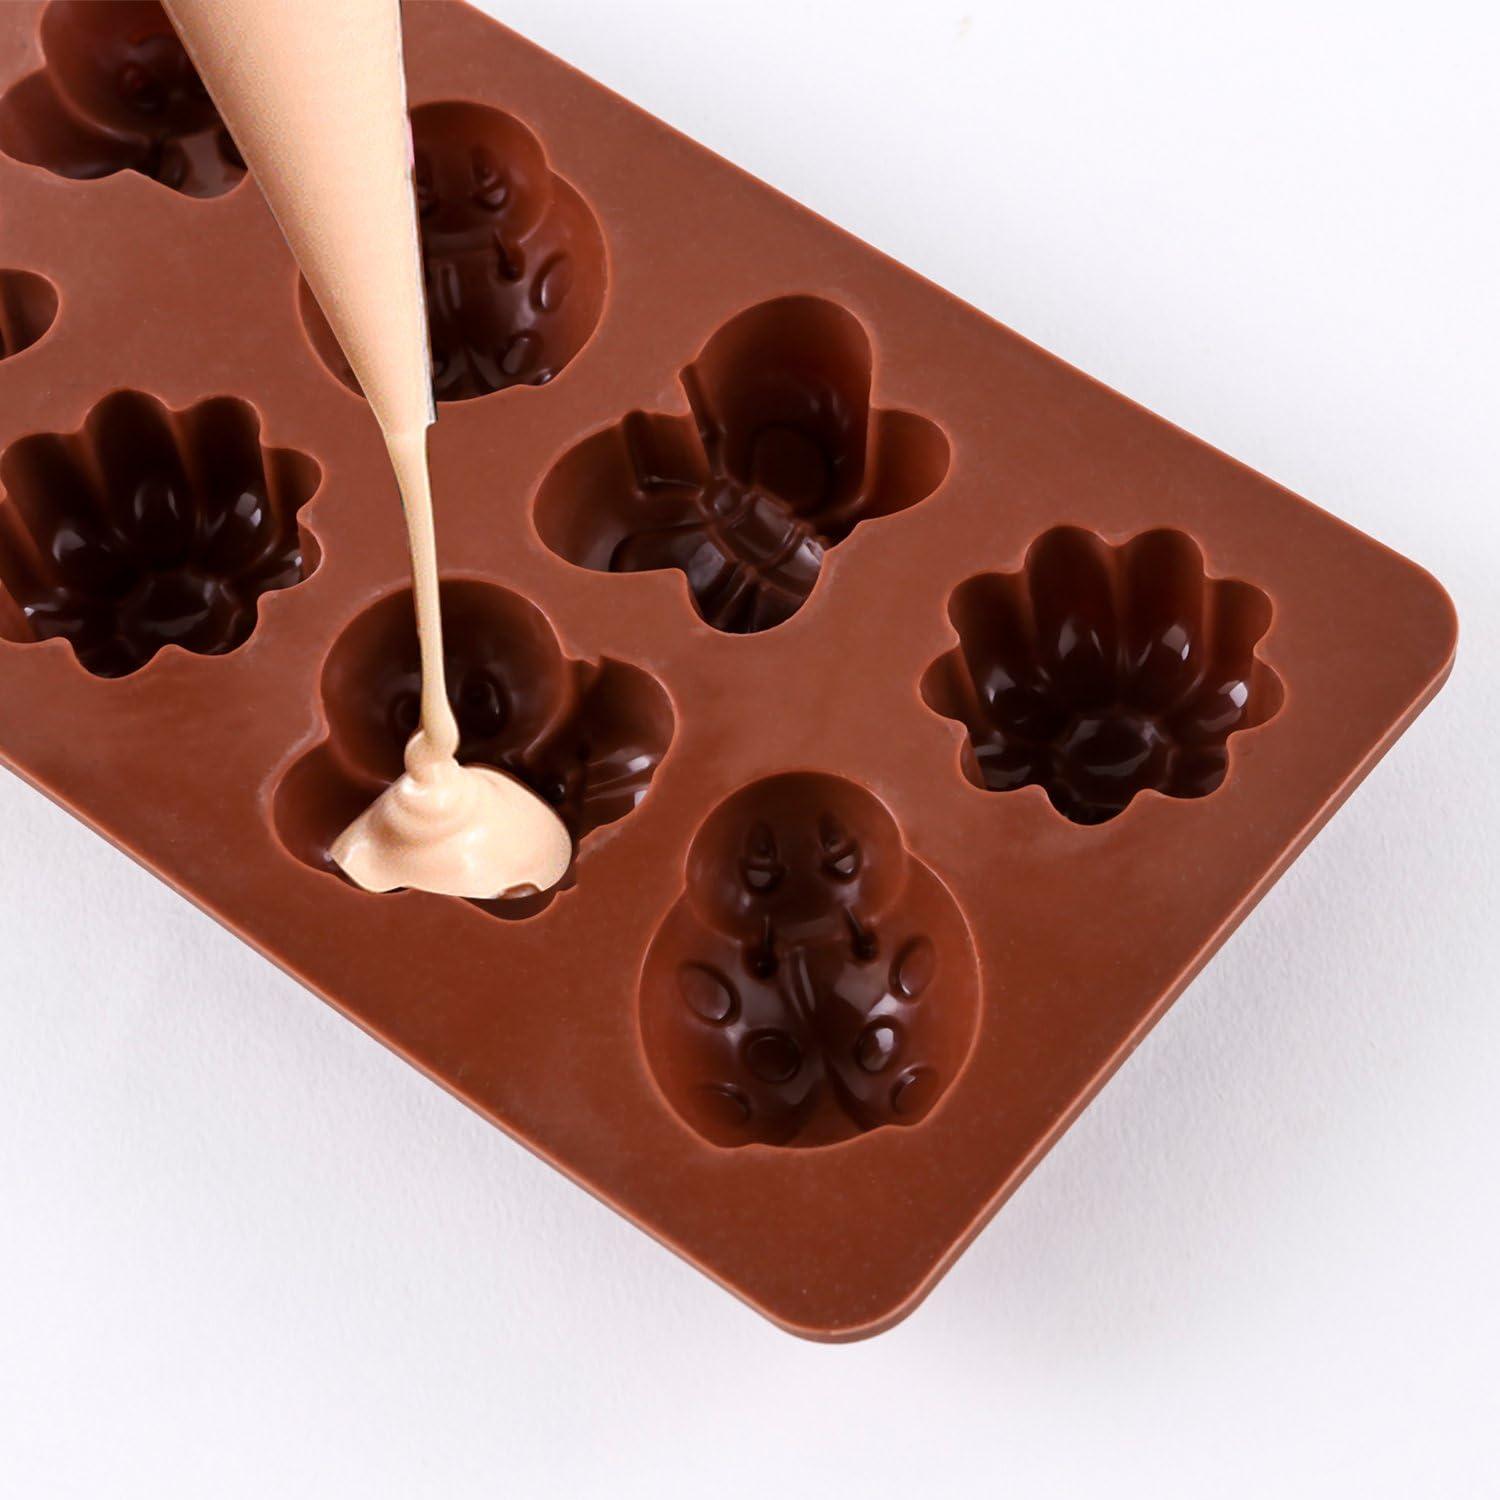 Silicone Chocolate Molds, Chocolate Candy Mold, Cake Chocolate Making Molds  Hard Chocolate Molds Kit for Kid, Men, Women Baking